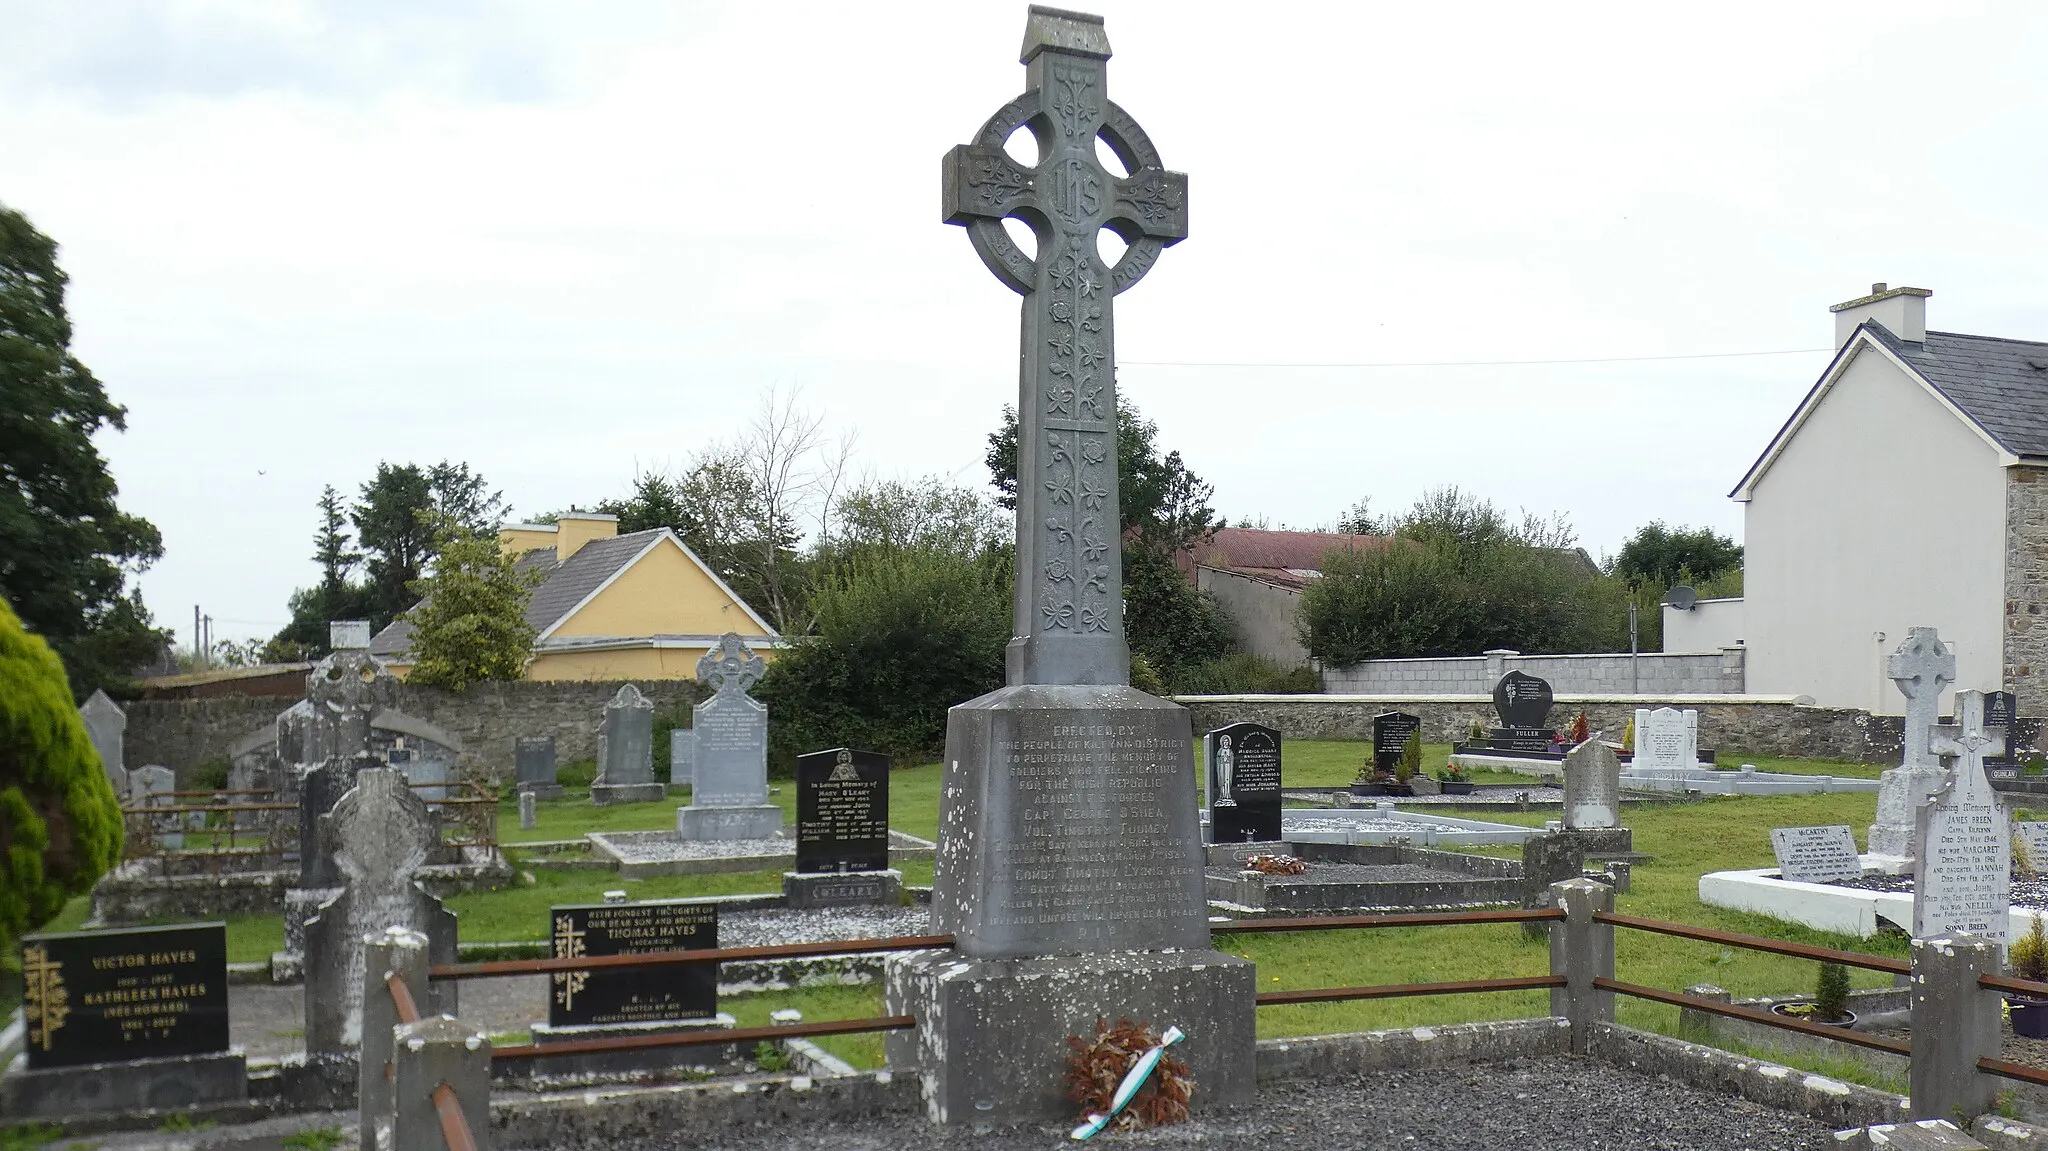 Photo showing: The Republican plot in the graveyard of St. Columba's Heritage Centre, Kilflynn, Ireland. George O'Shea, Timothy Tuomey and Timothy Lyons lie here.